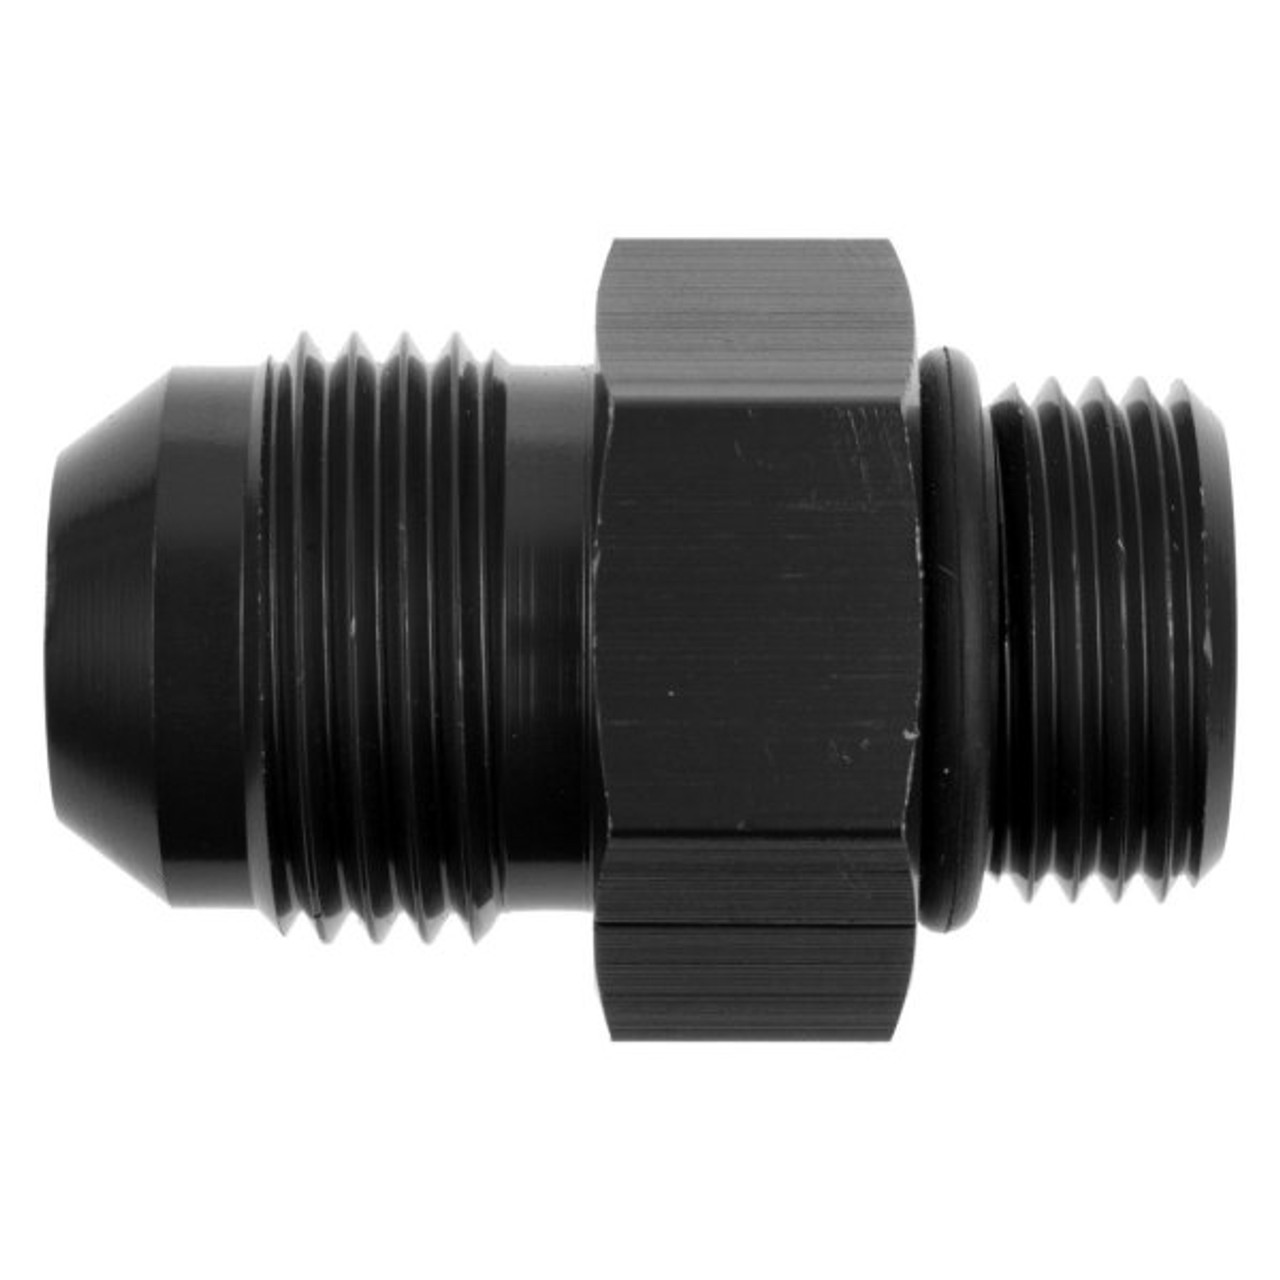 RHP920-08-06-2, AN Port Adapter  -08 male to -06 o-ring port adapter (high f